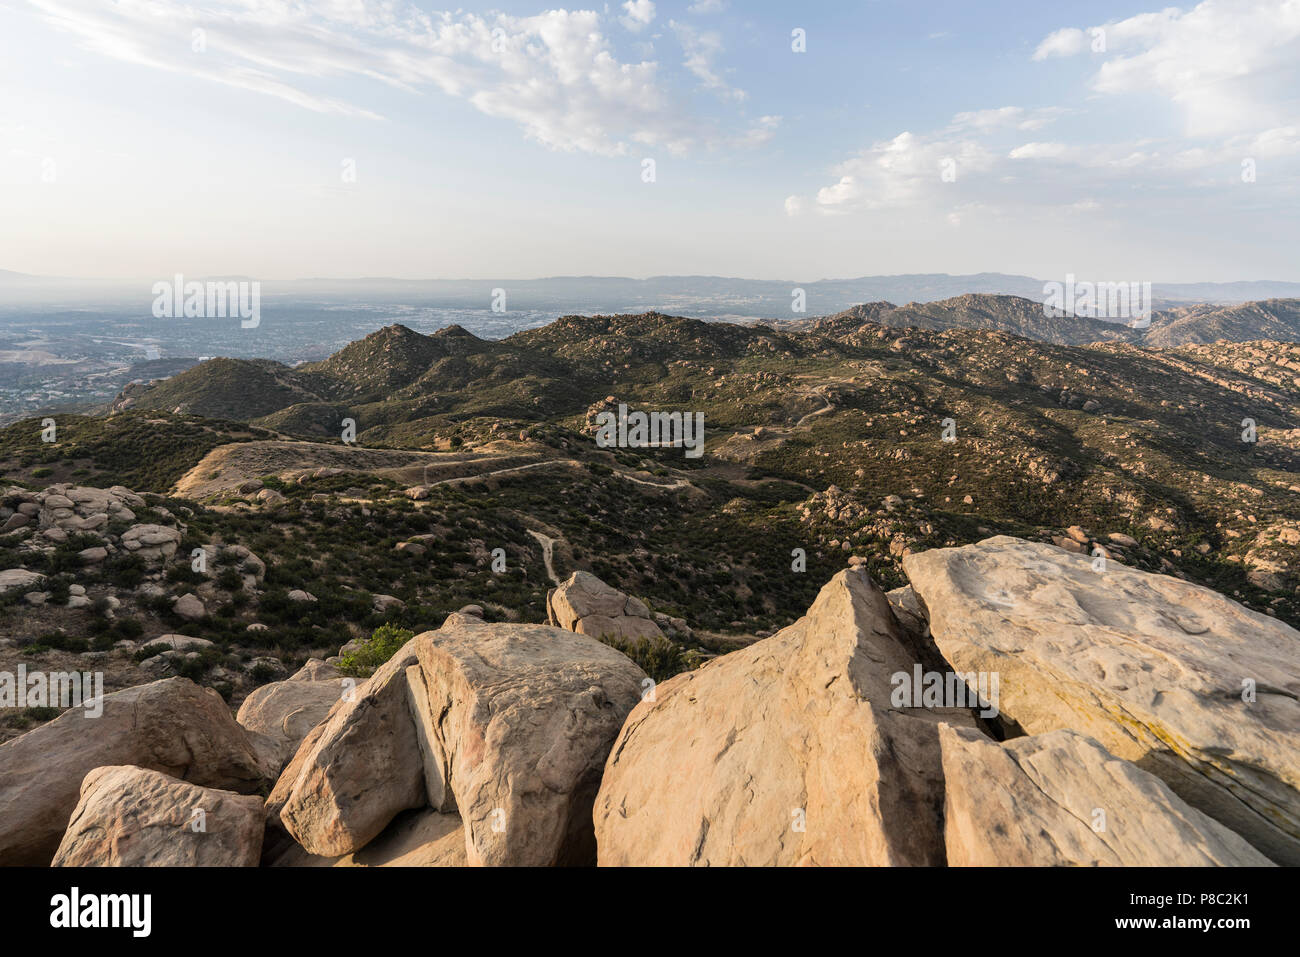 Rocky Peak Mountain Park and the San Fernando Valley in Los Angeles, California. Stock Photo